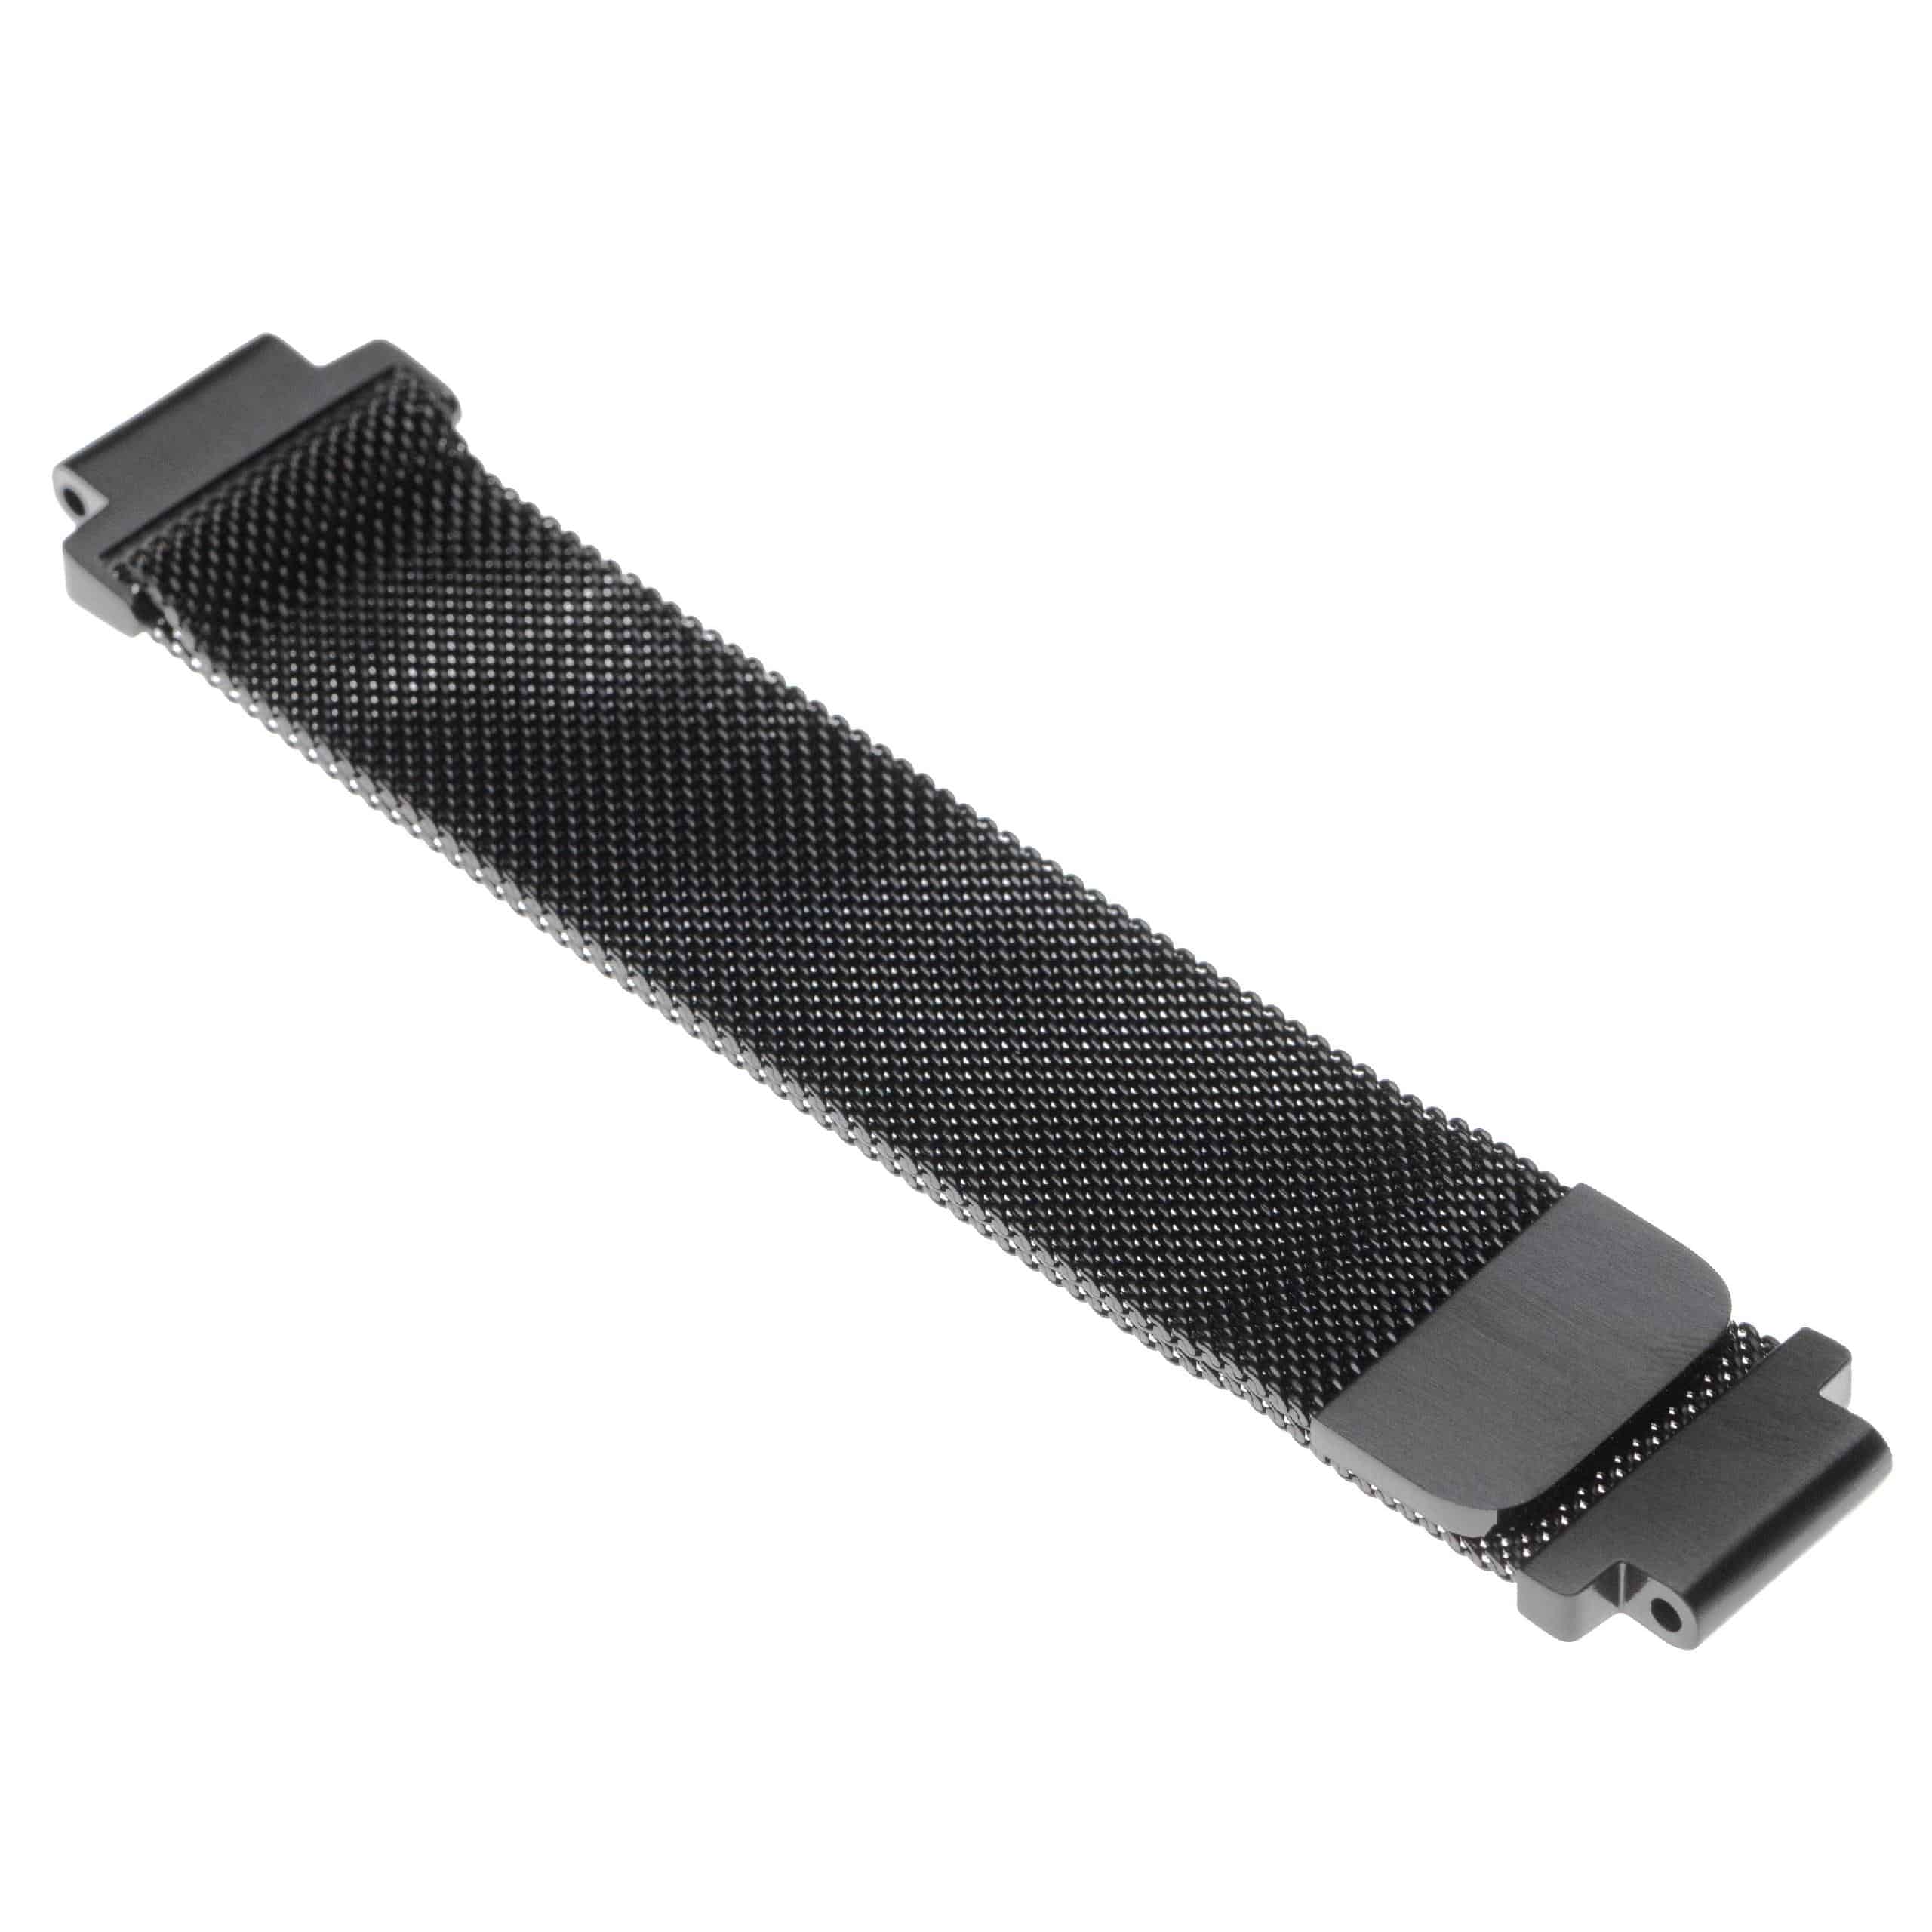 wristband for Garmin Forerunner / Approach Smartwatch - Up to 224 mm wrist circumference, stainless steel, bl